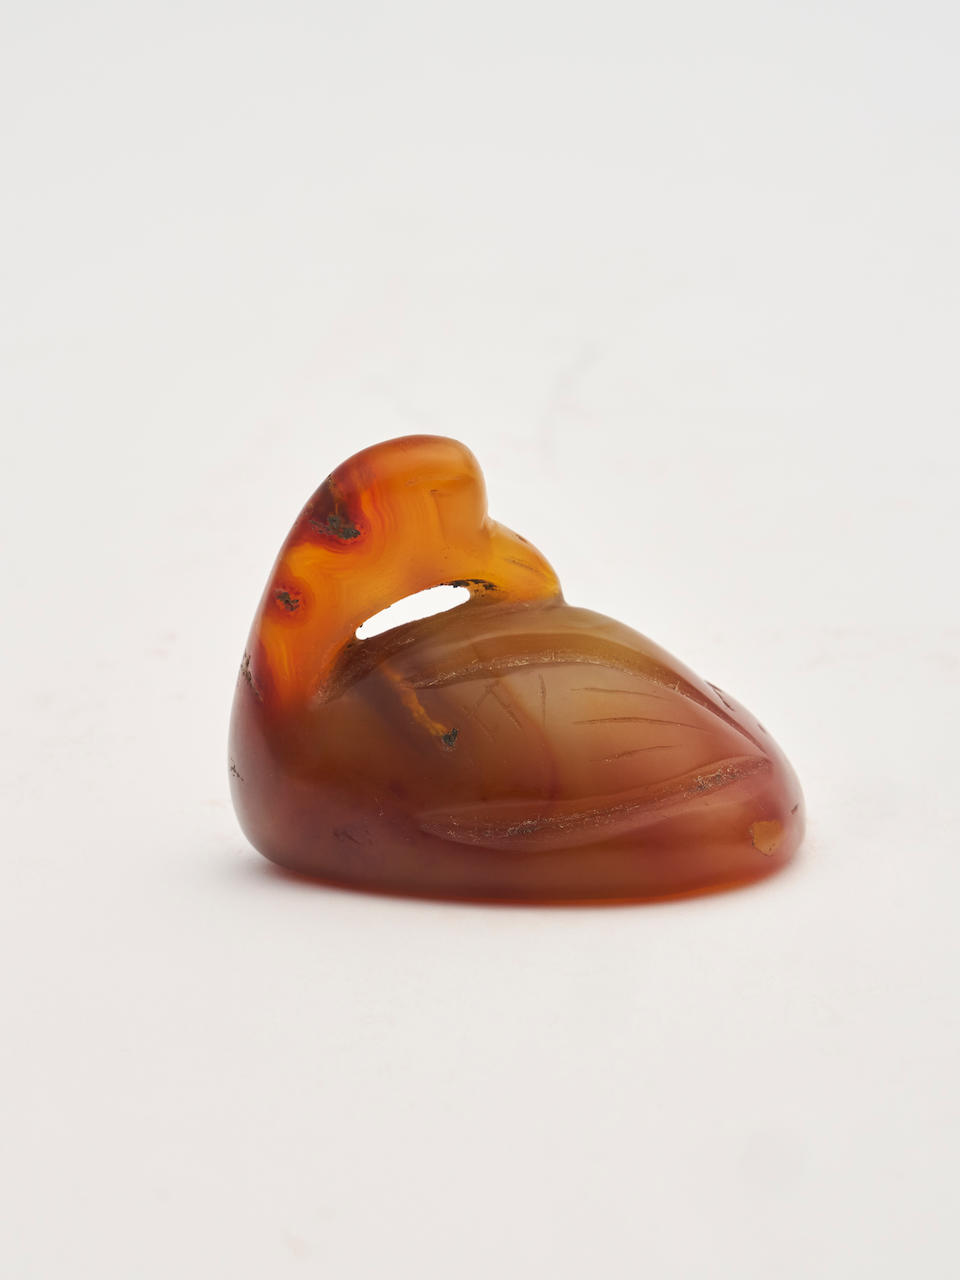 An agate 'goose' carving